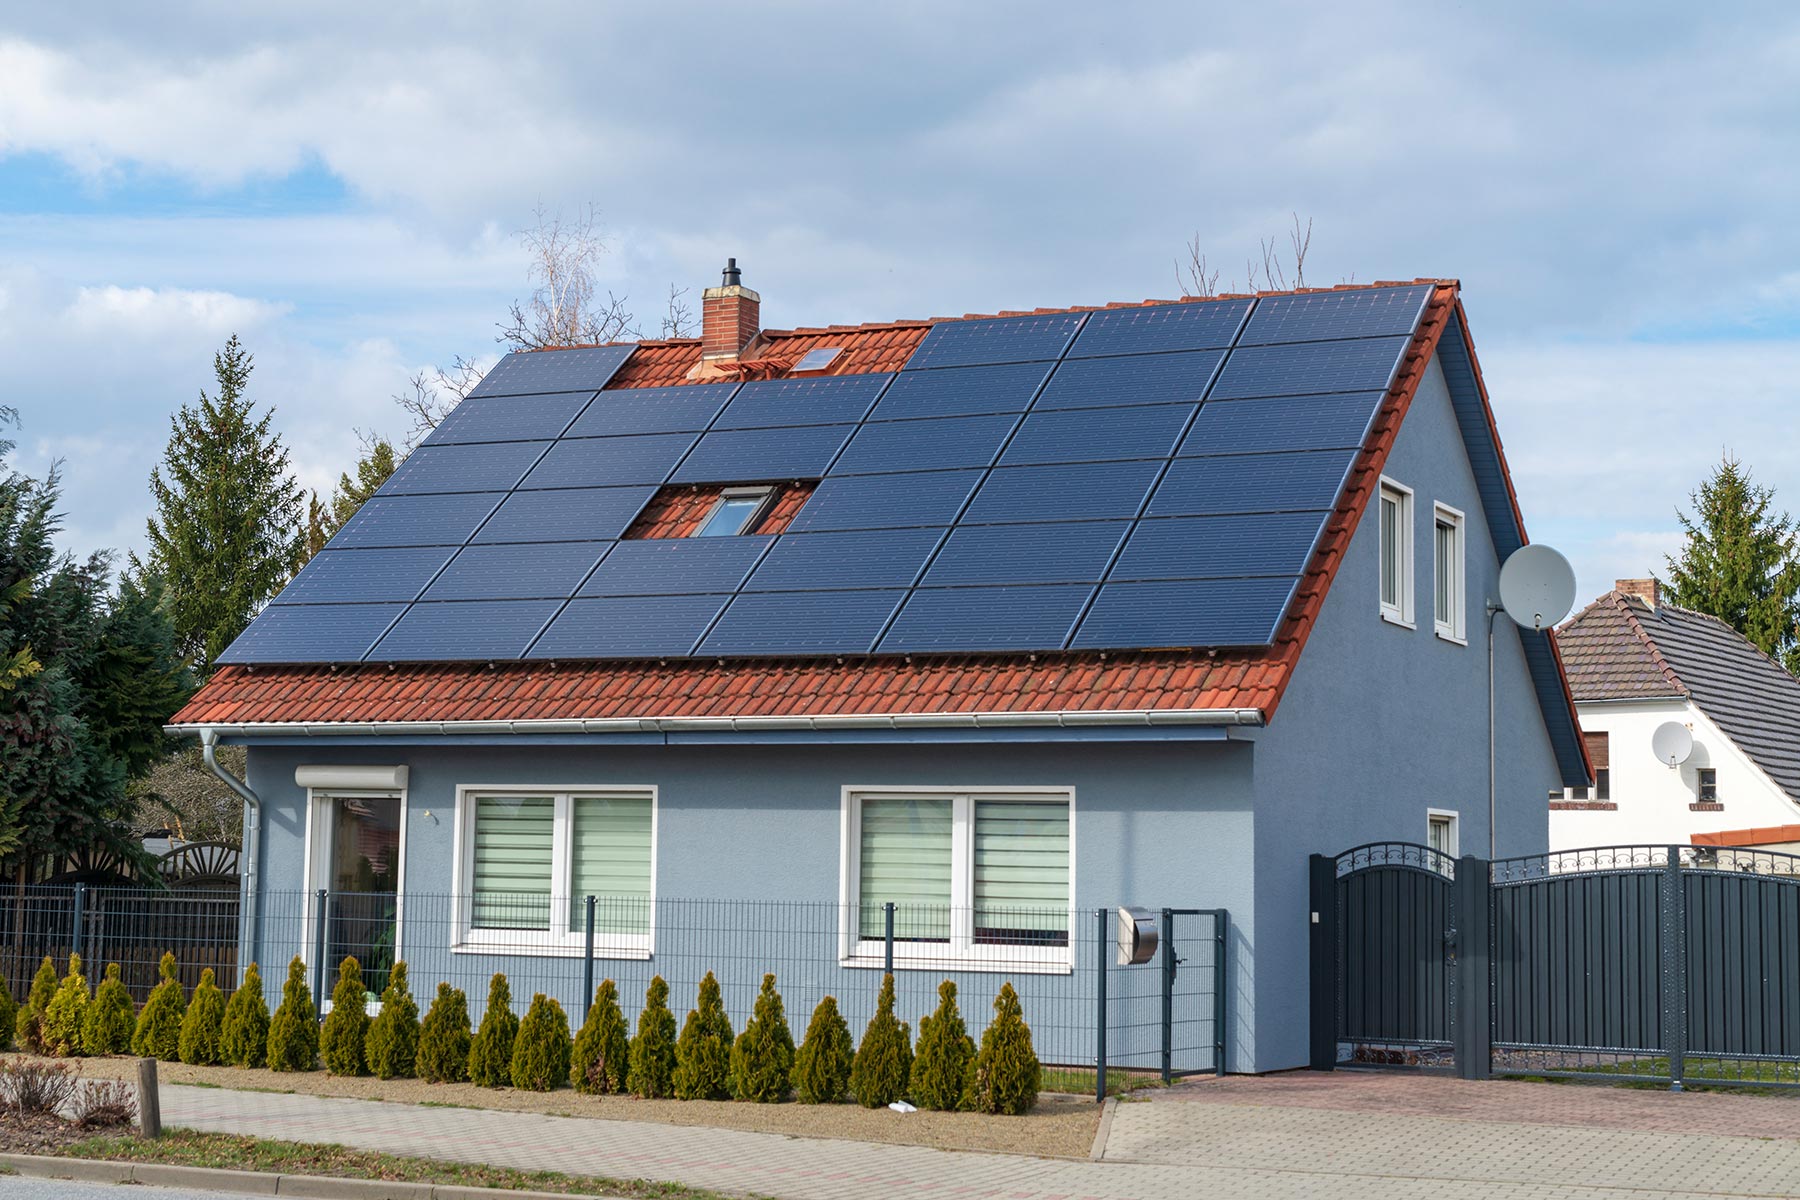 image of a home with solar panels